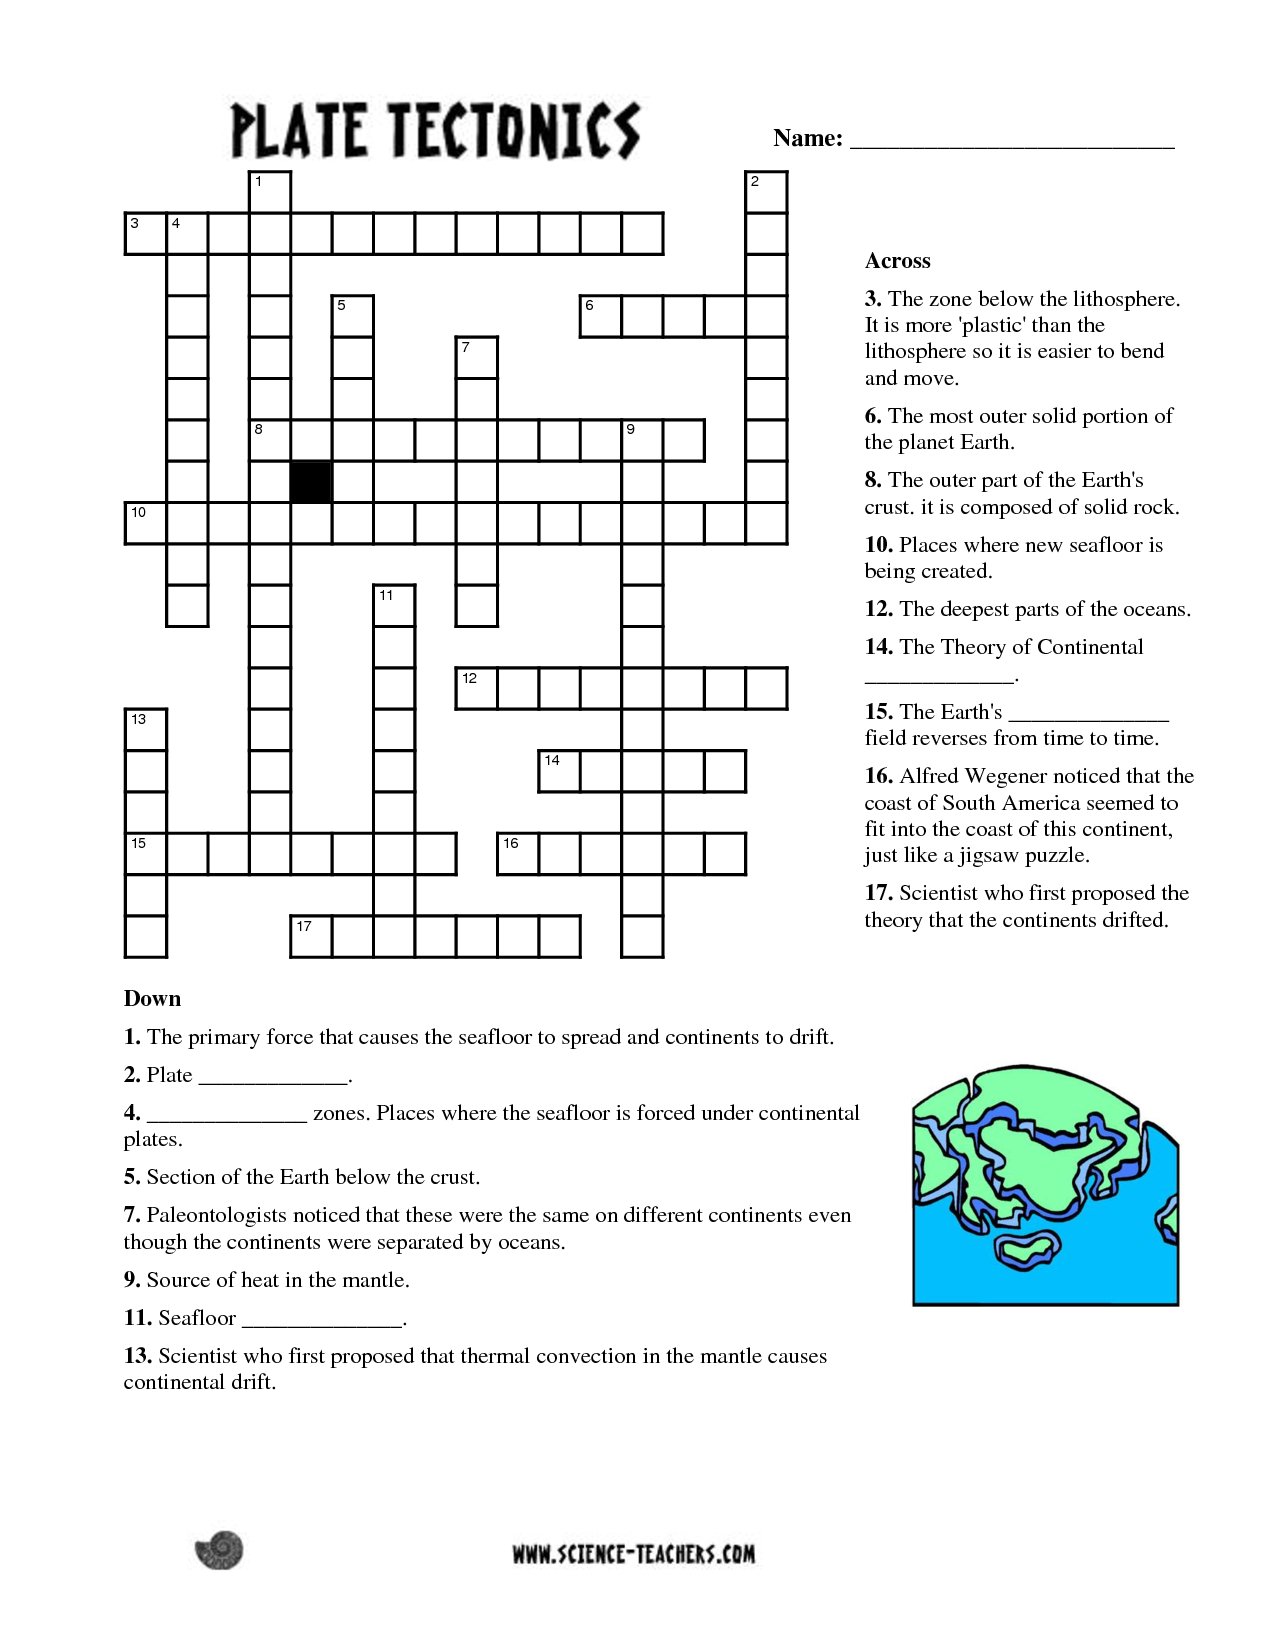 Planets Crossword Puzzle Worksheet - Pics About Space | Fun Science - Printable English Crossword Puzzles With Answers Pdf